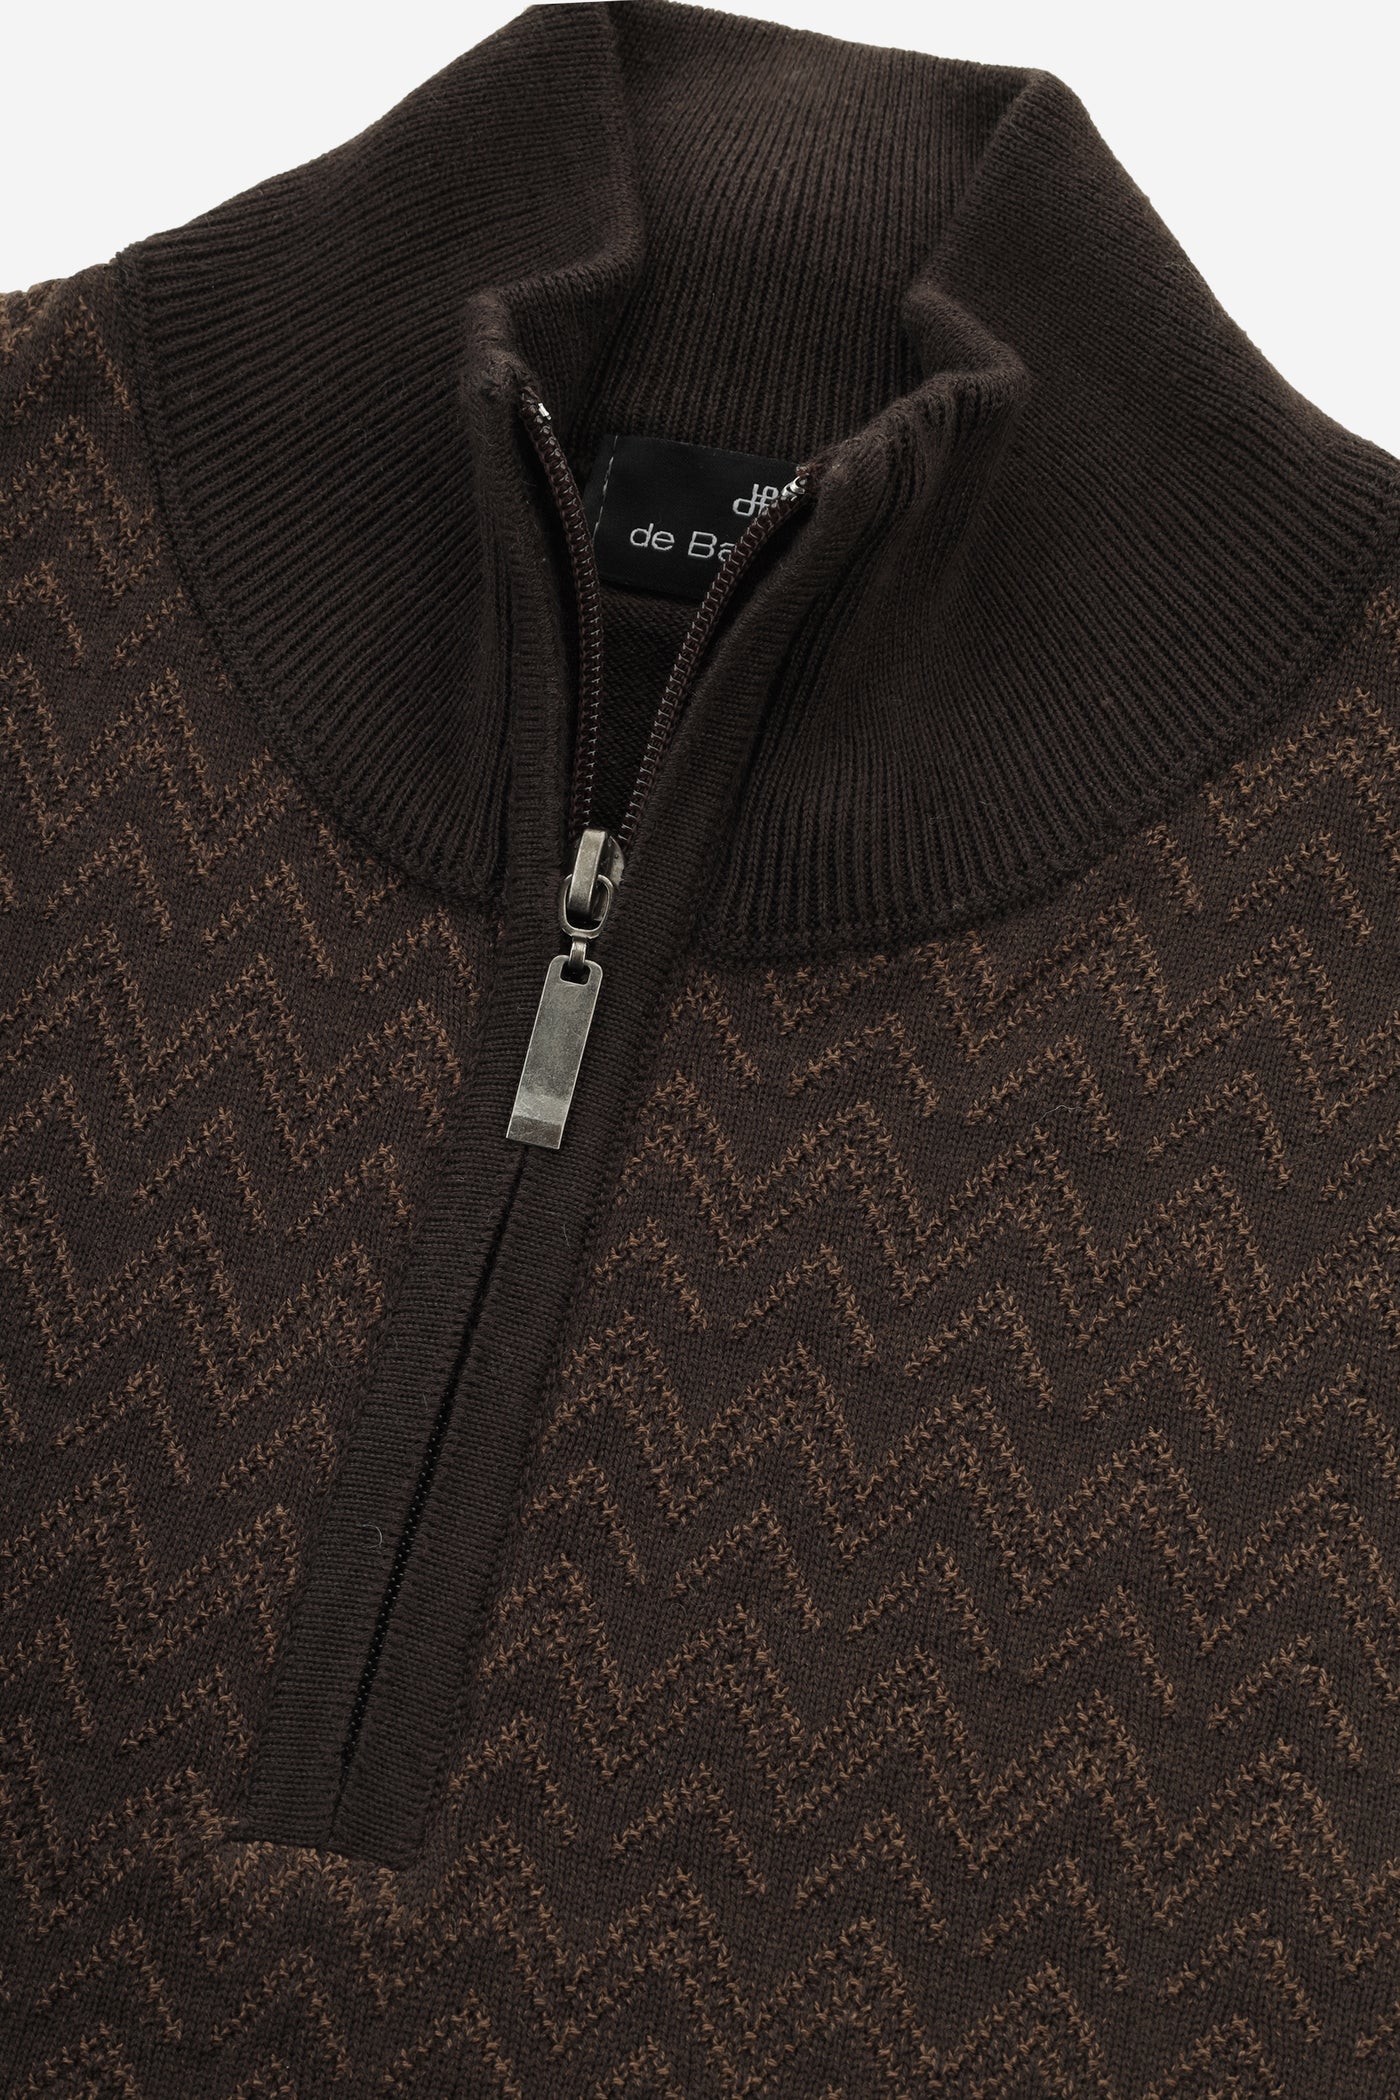 Jacquard Knitted Quarter Zip Saddle Brown  Pullover